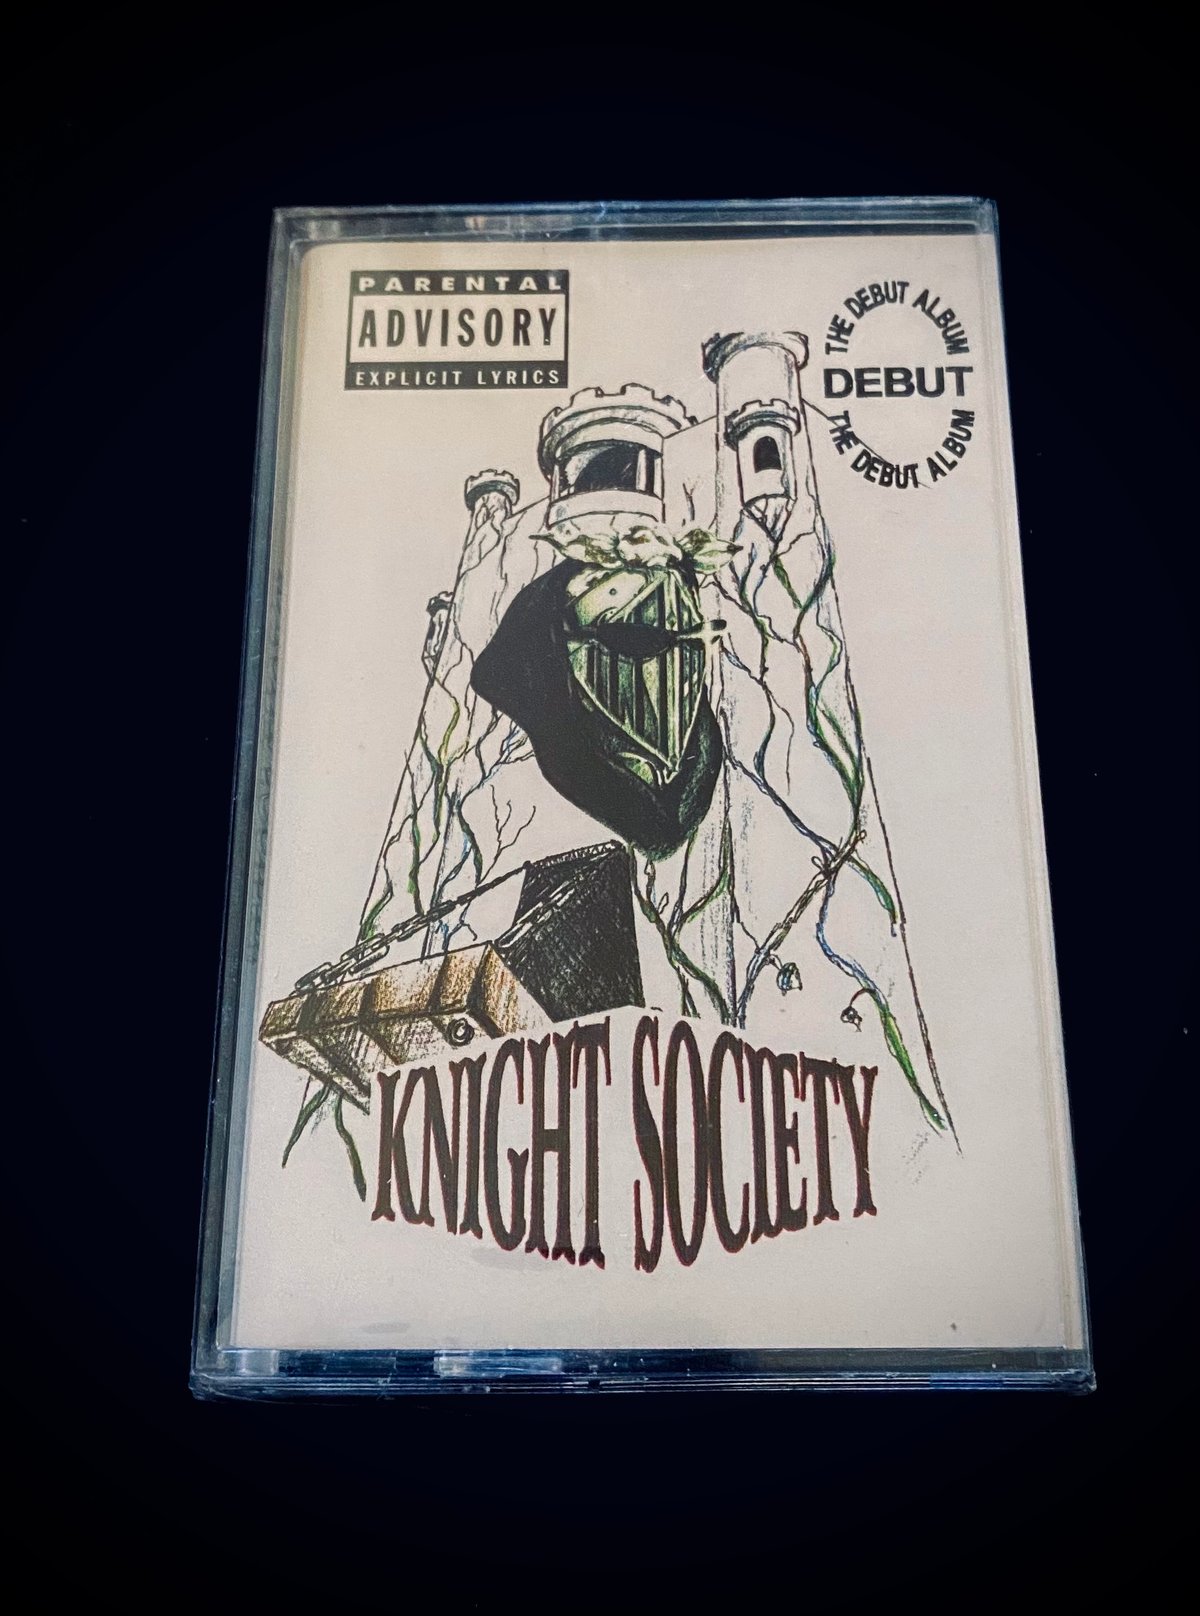 Image of KNIGHT SOCIETY “The debut Album”